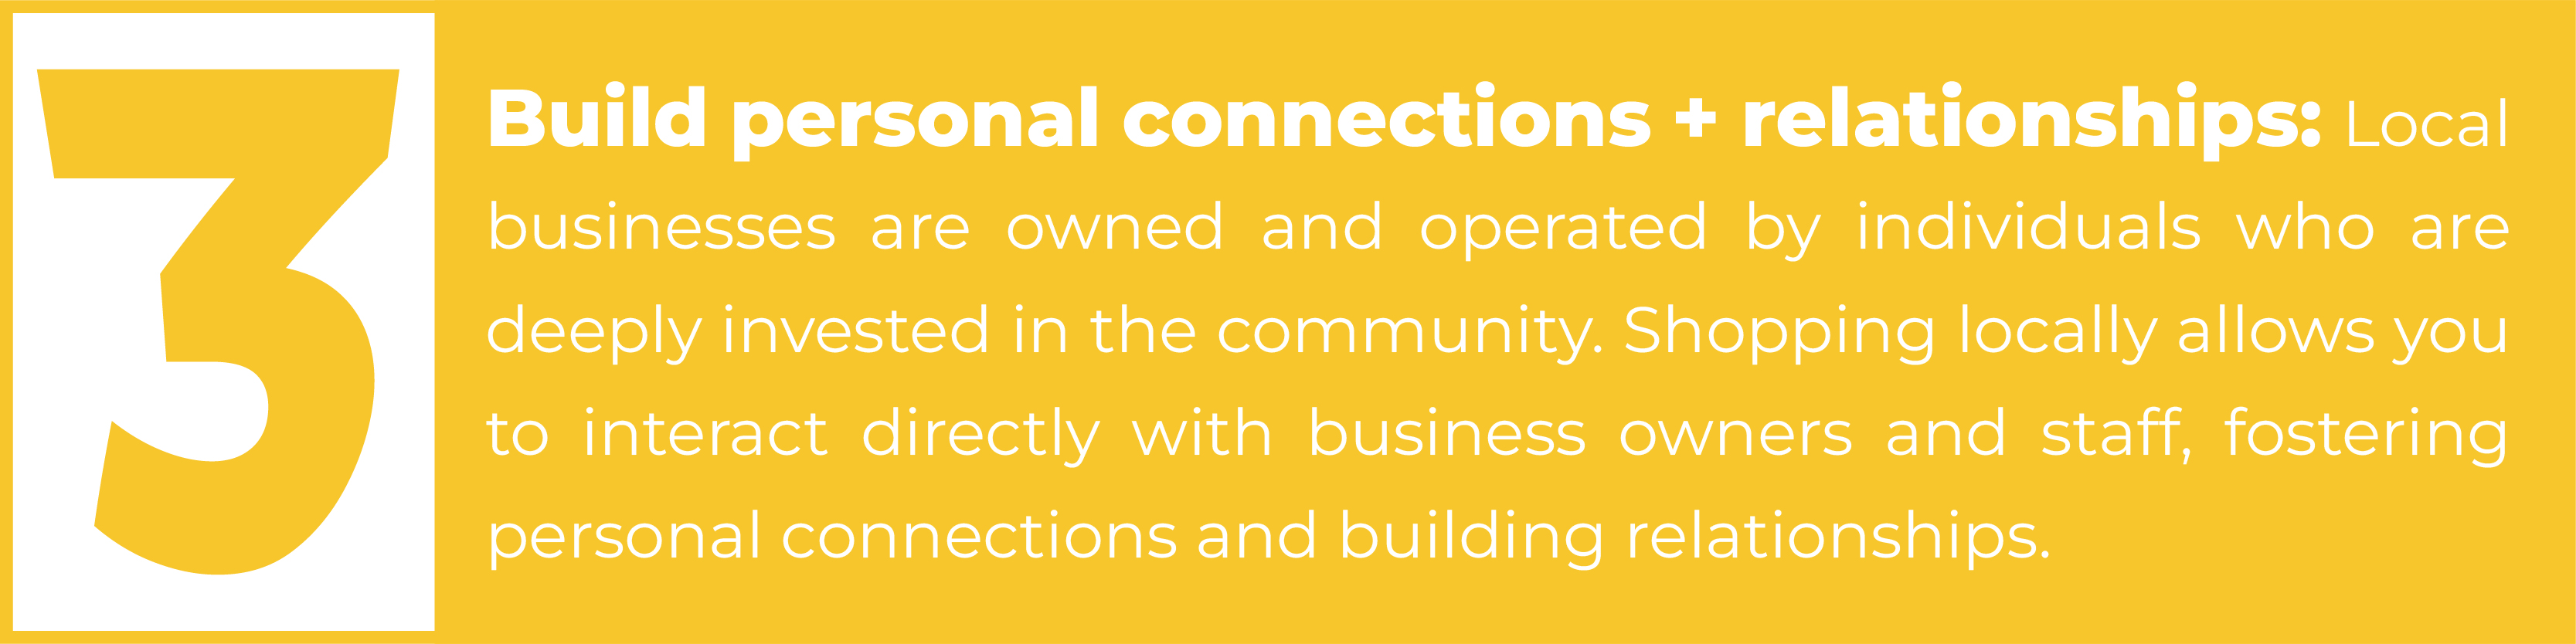 3. Build personal connections + relationships: Local businesses are owned and operated by individuals who are deeply invested in the community. Shopping locally allows you to interact directly with business owners and staff, fostering personal connections and building relationships.